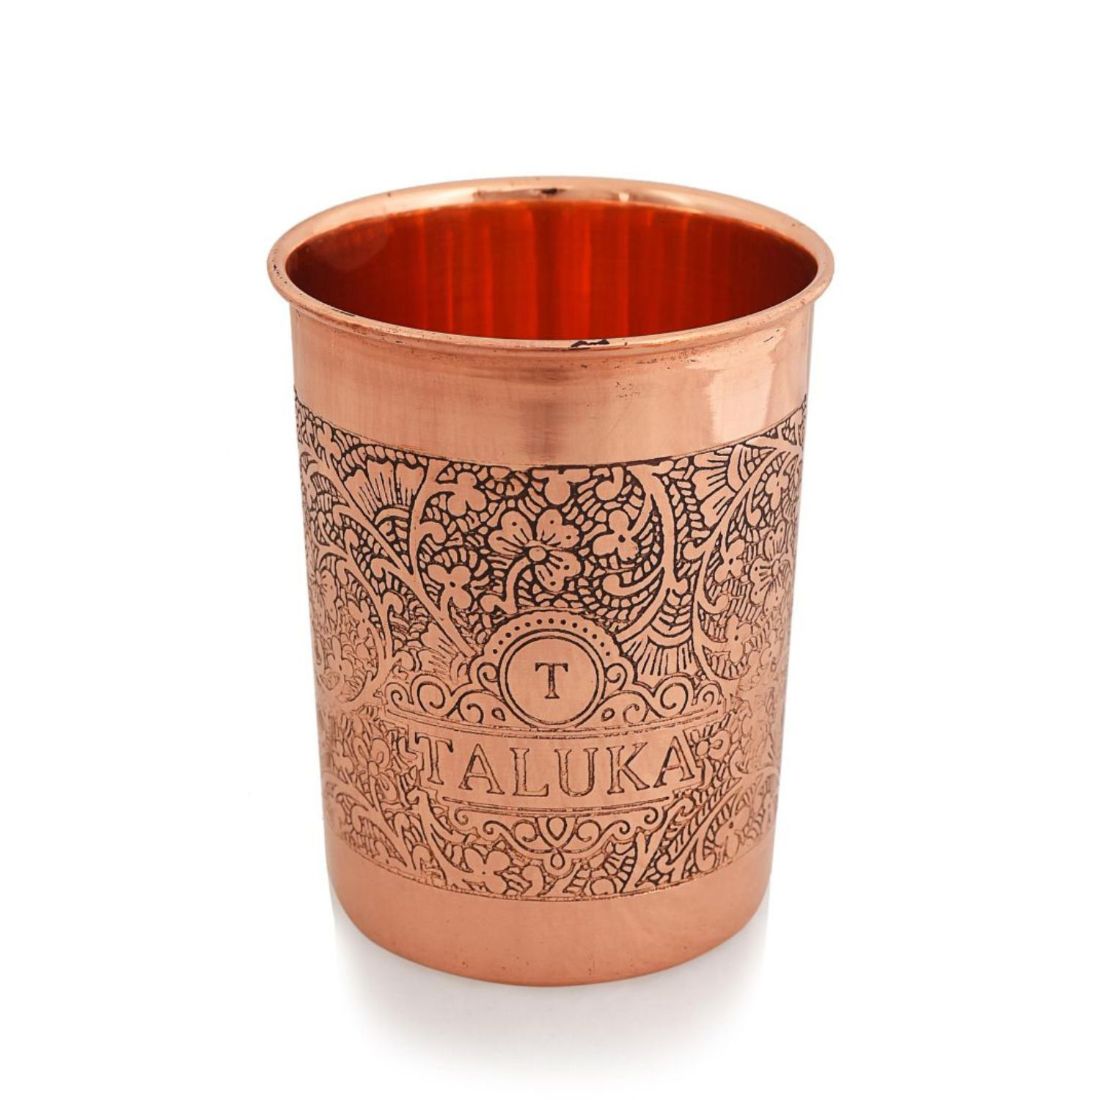 Copper Etching Embossed Tumbler Glass with Taluka Logo | Health Benefits Ayurveda Yoga | Table Serving Drinkware Hotel Home Restaurant